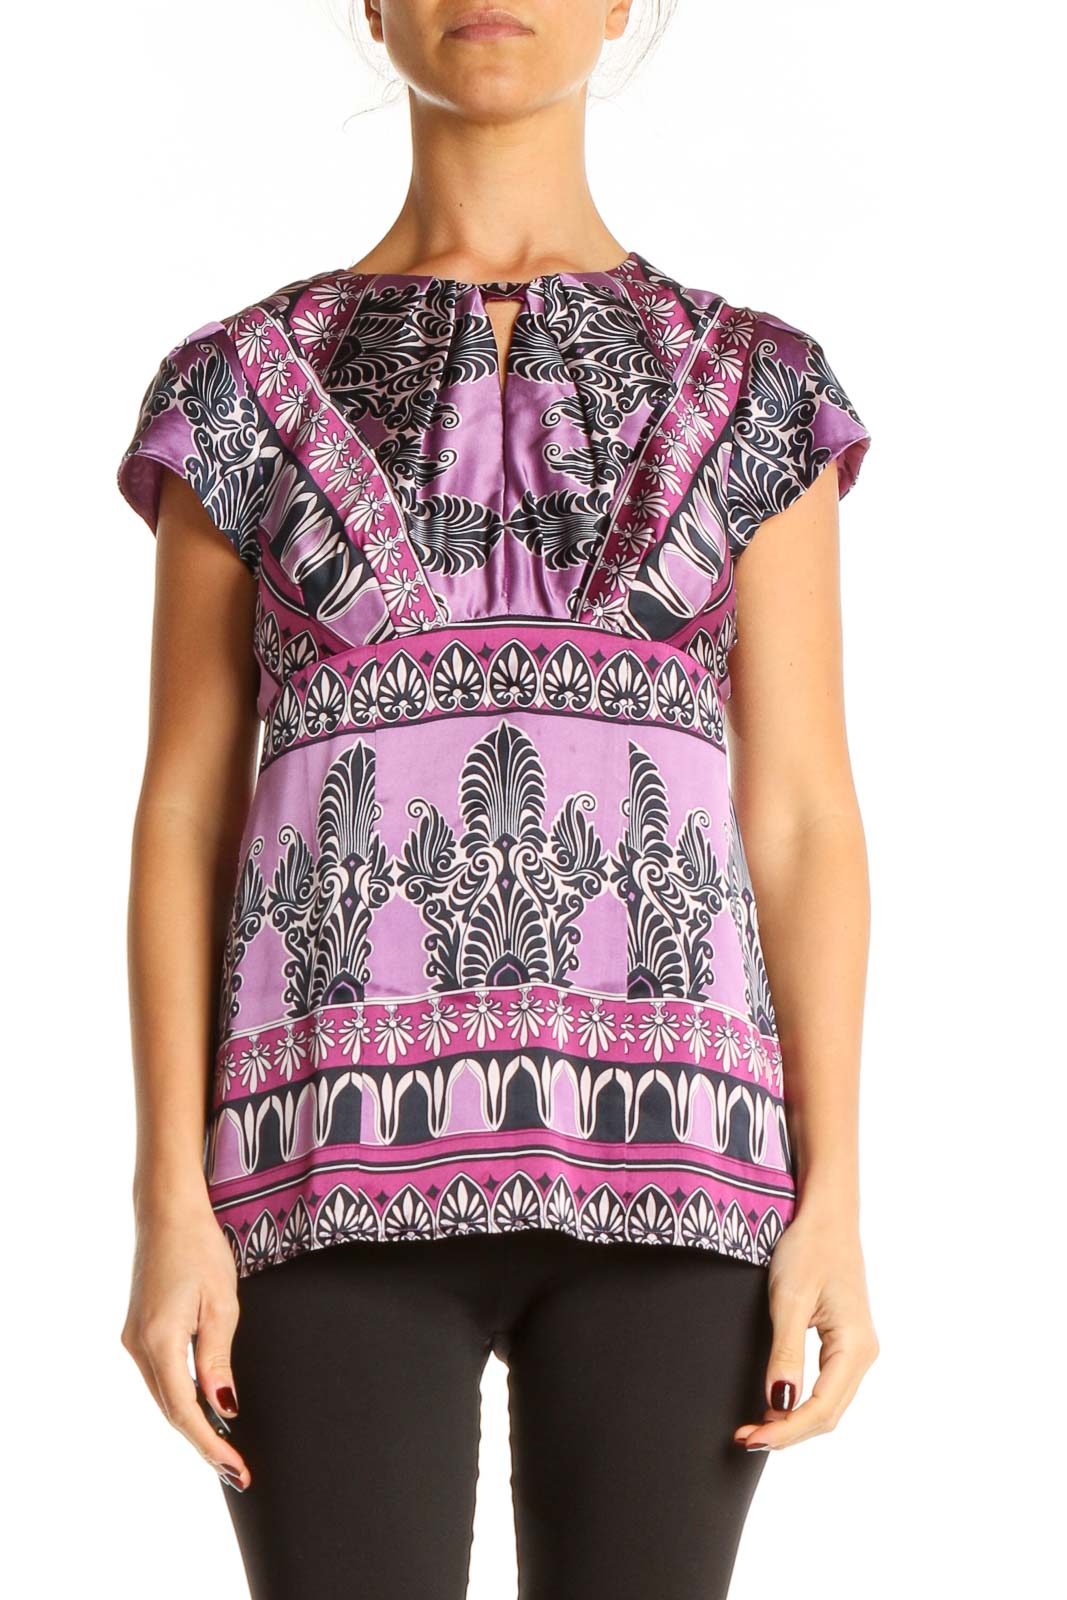 Pink Printed Retro Top Front